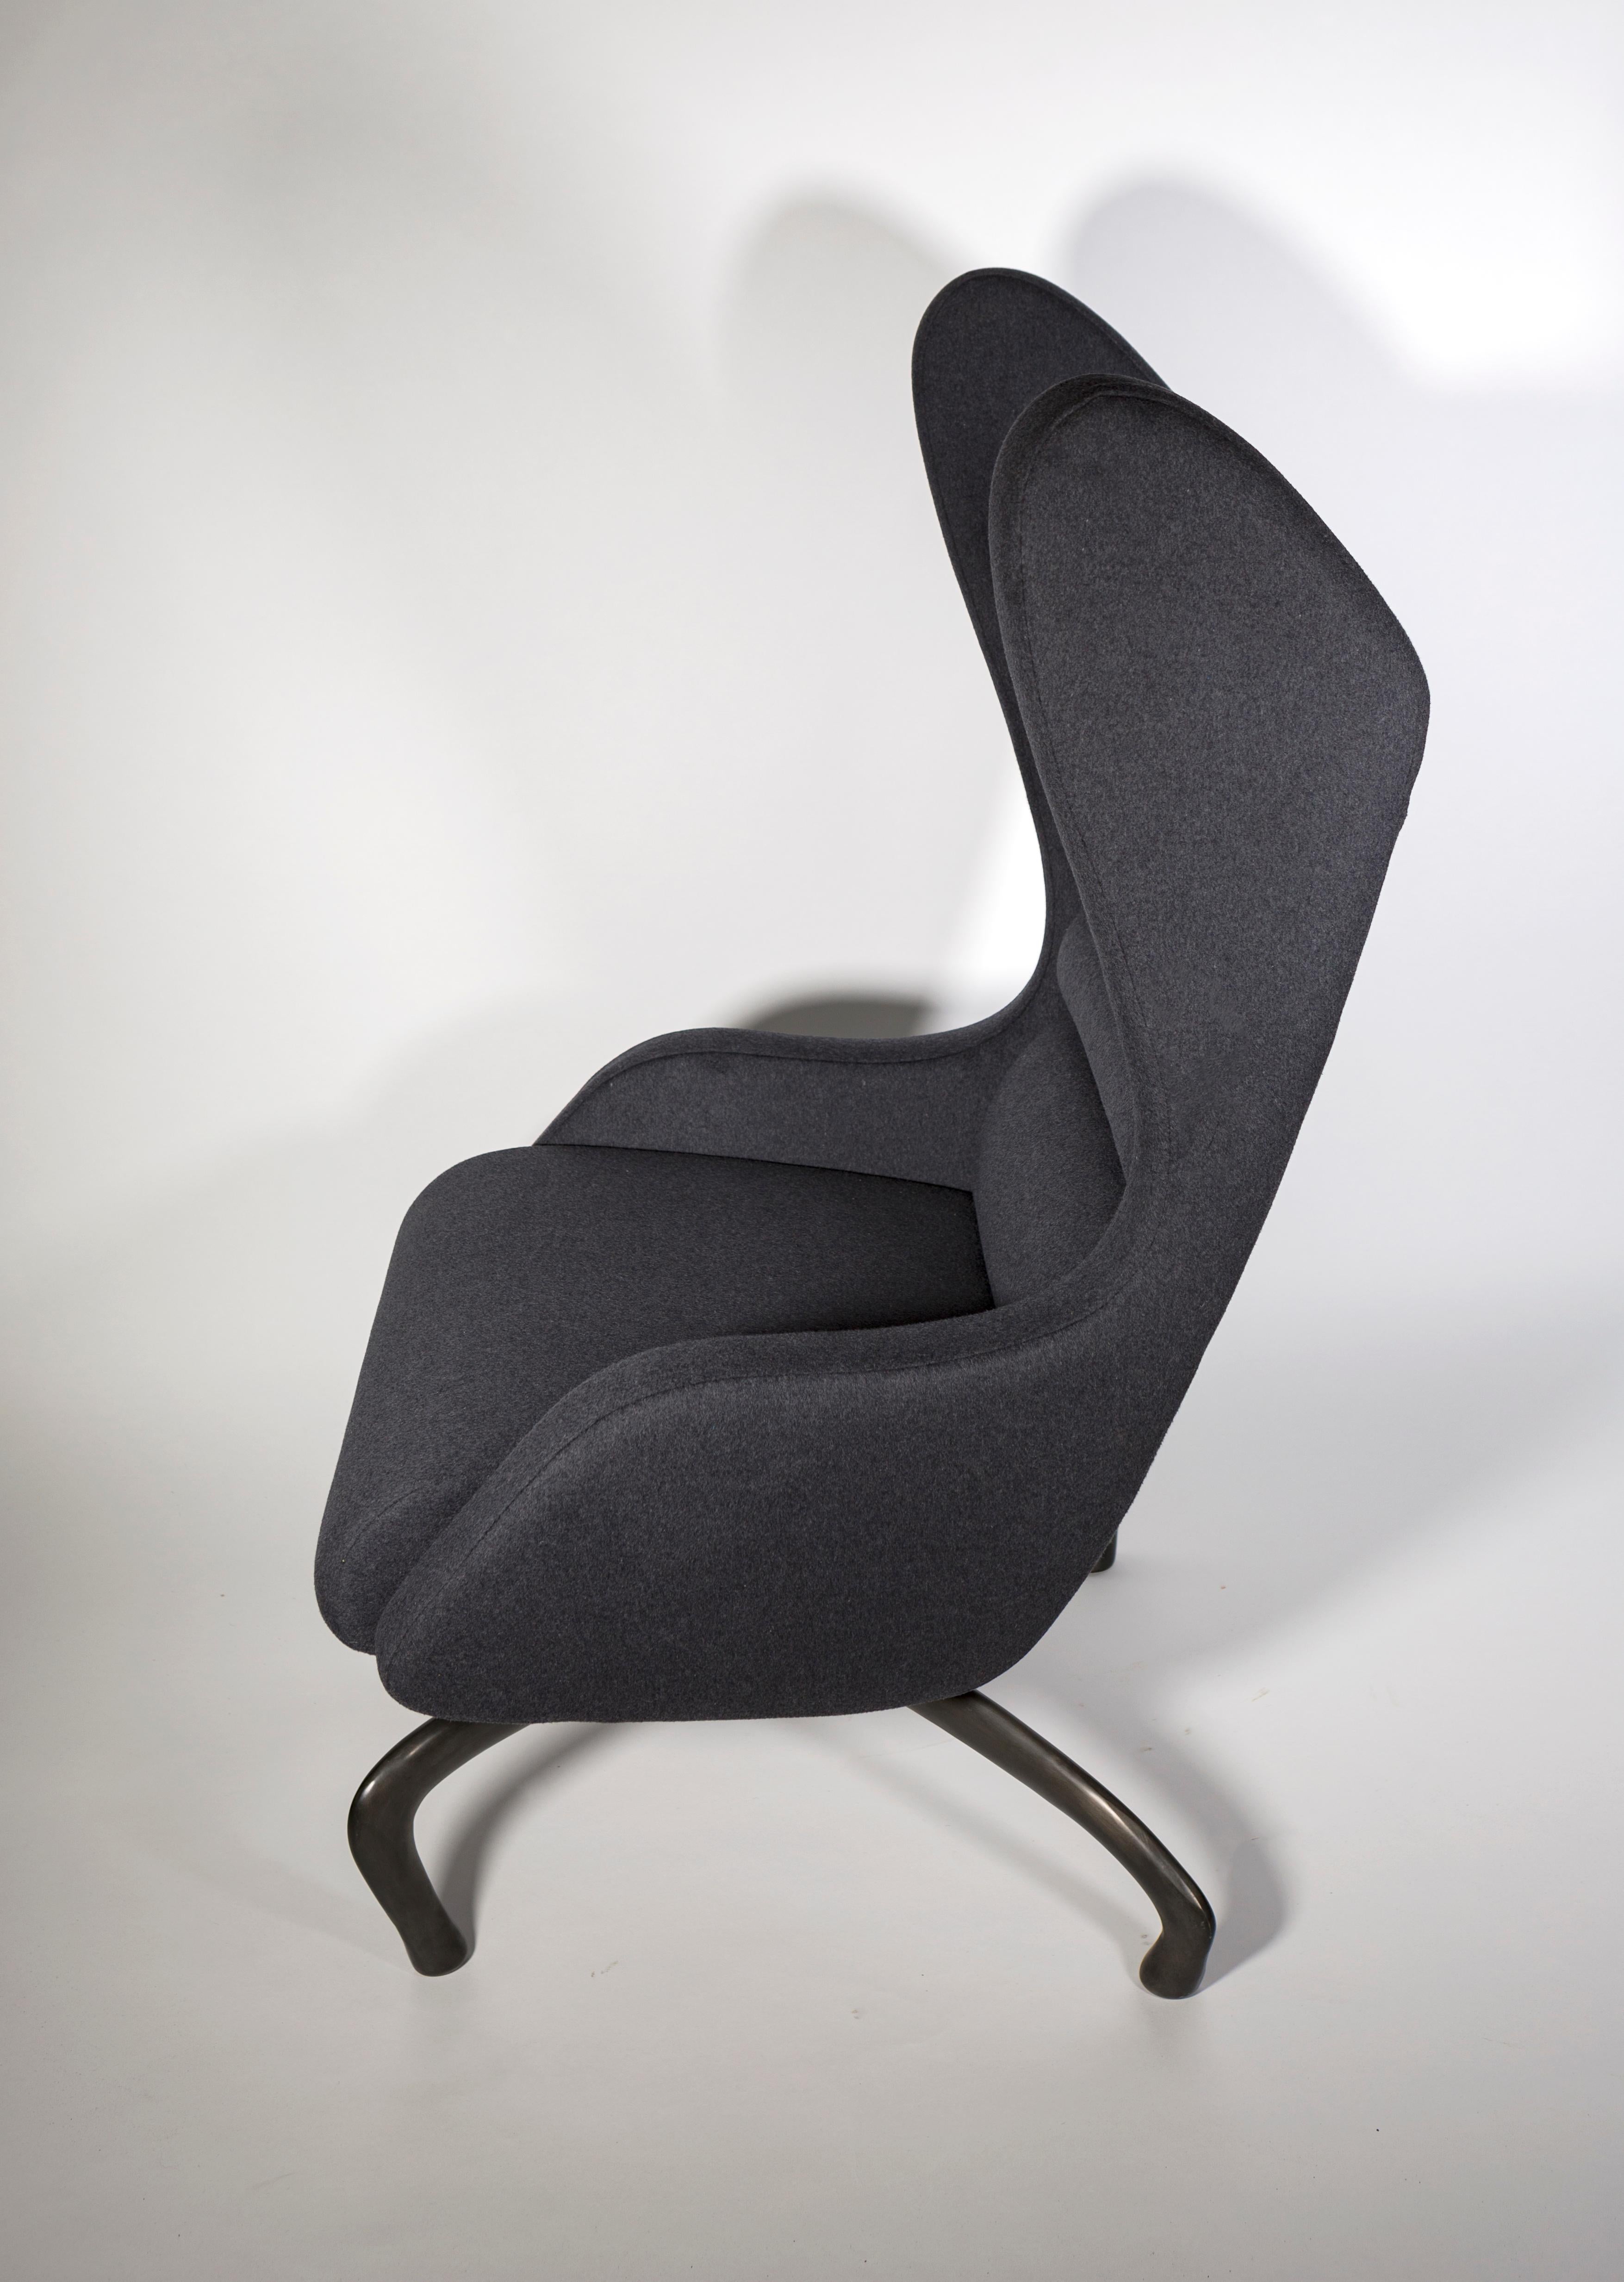 Hand-Carved Cantering Lounge Chair, Wool Flannel / Cast Aluminum, Jordan Mozer, USA, 2003/18 For Sale